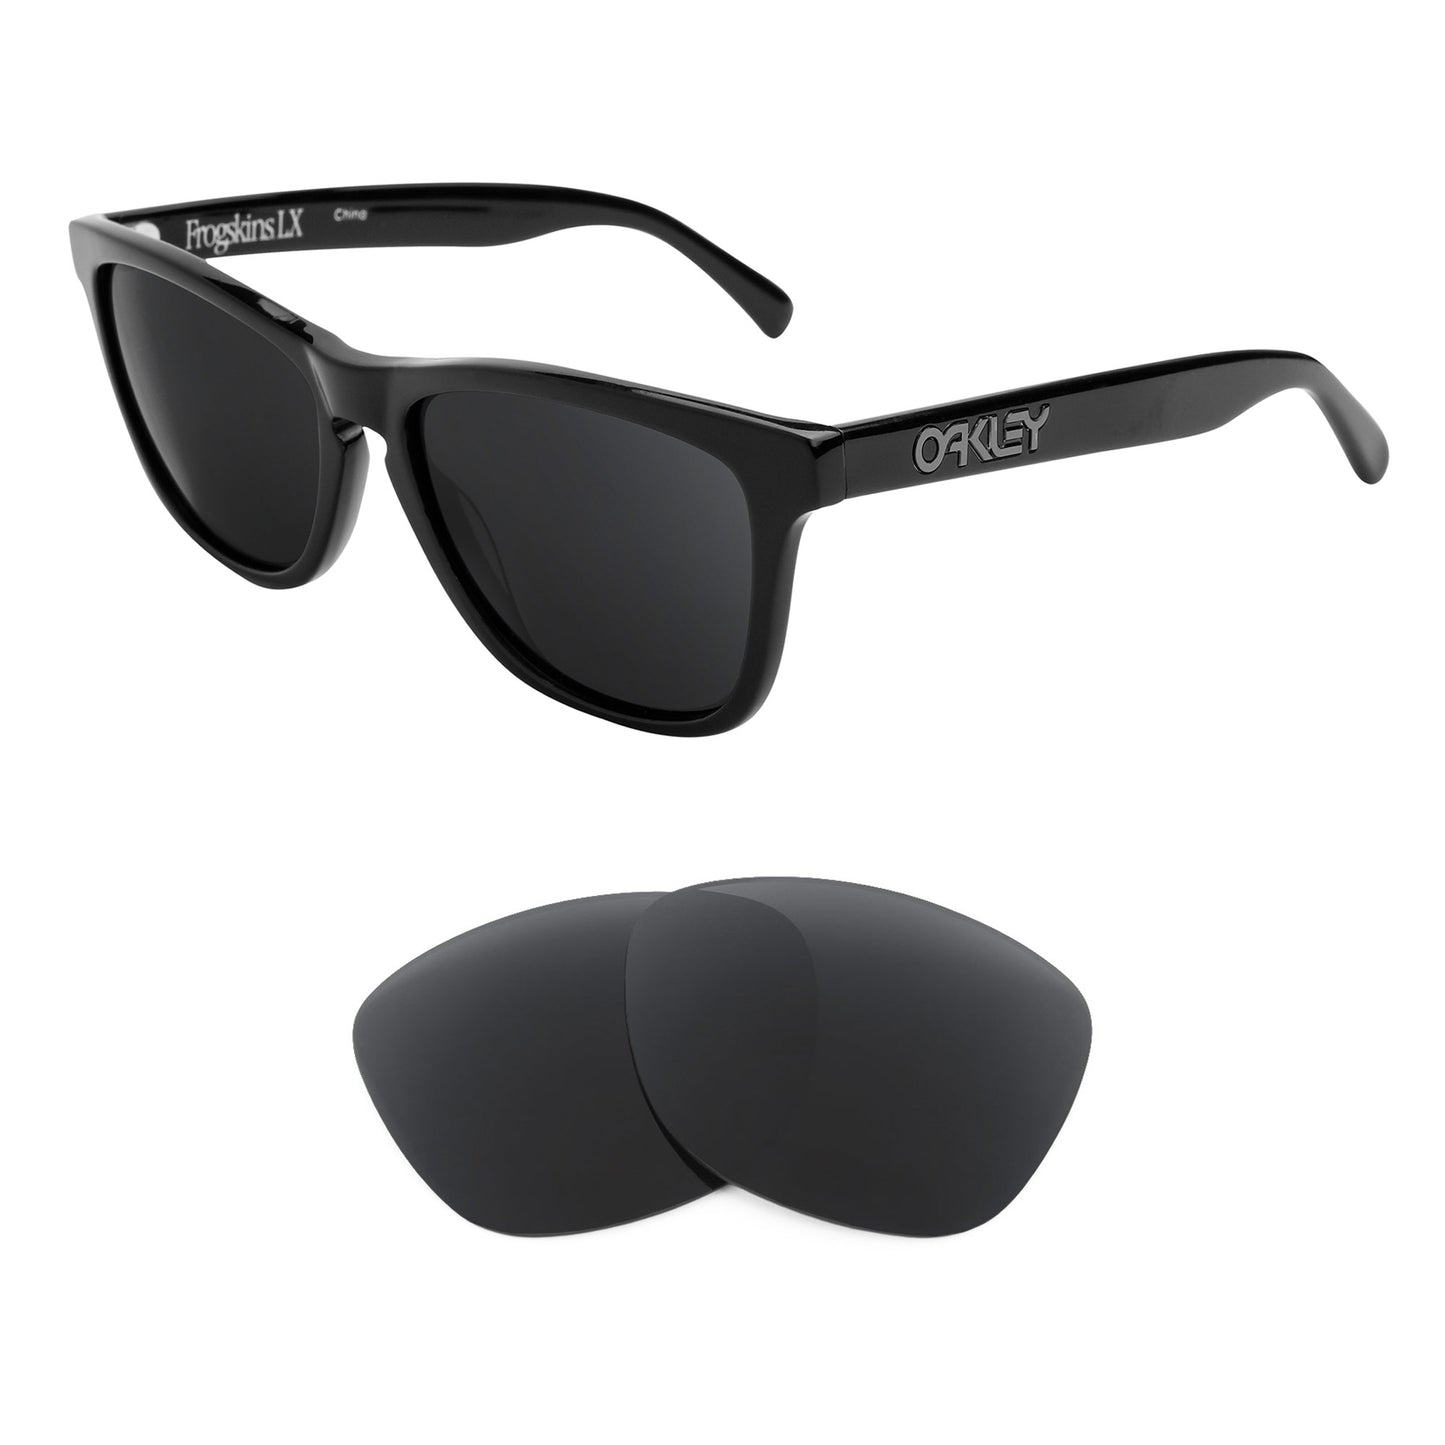 Oakley Frogskins LX sunglasses with replacement lenses